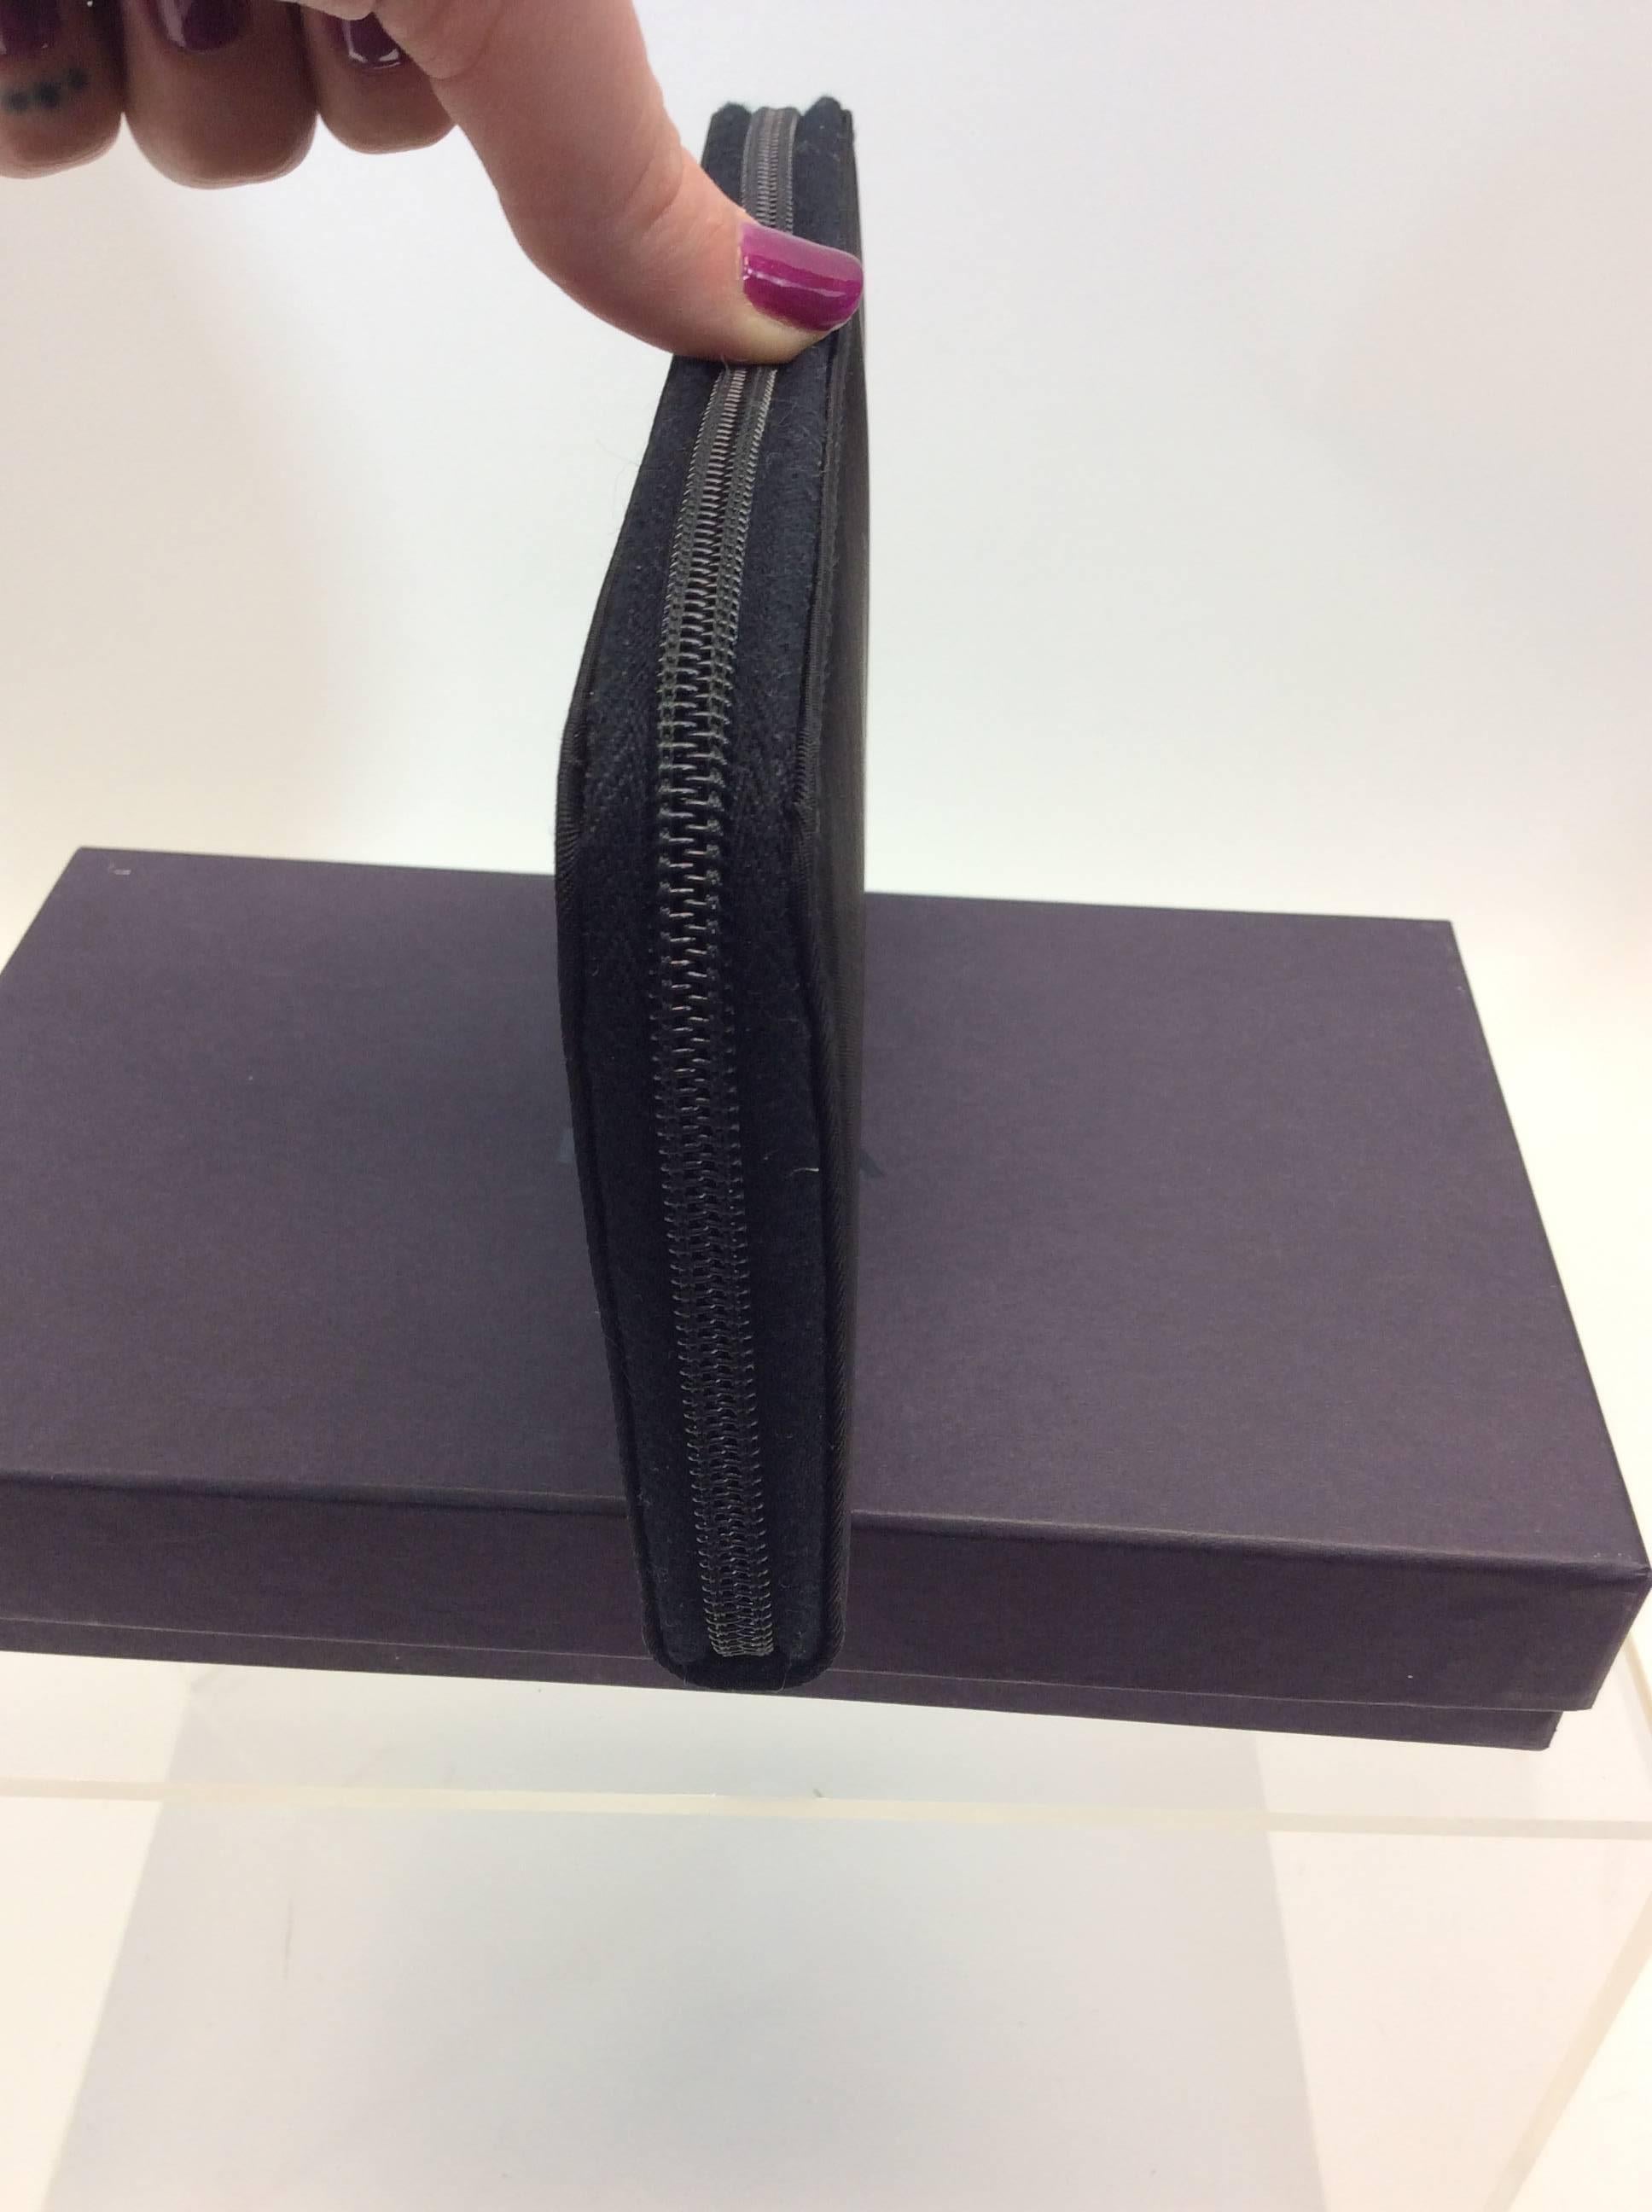 Prada Black Nylon Zip Wallet In Excellent Condition For Sale In Narberth, PA